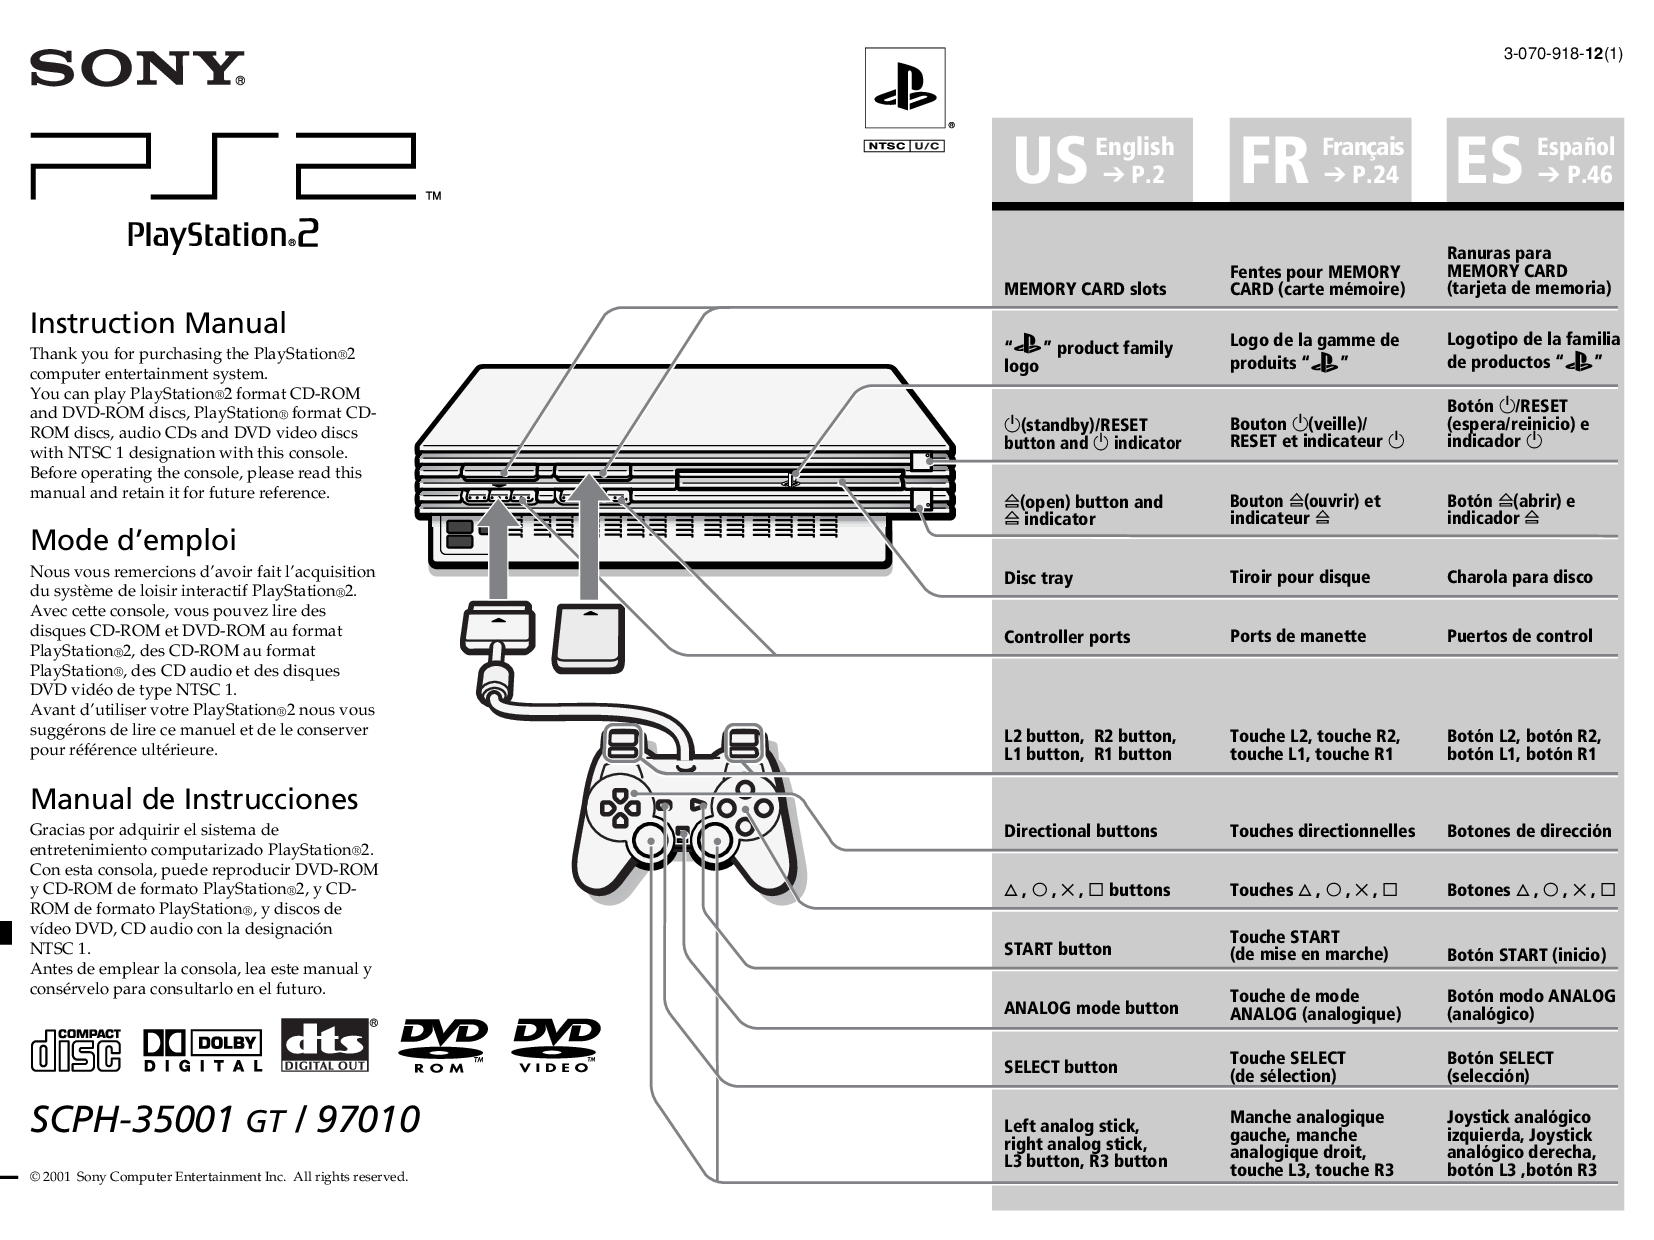 Sony Playstation 2 SCPH-35001 GT-97010 User Manual